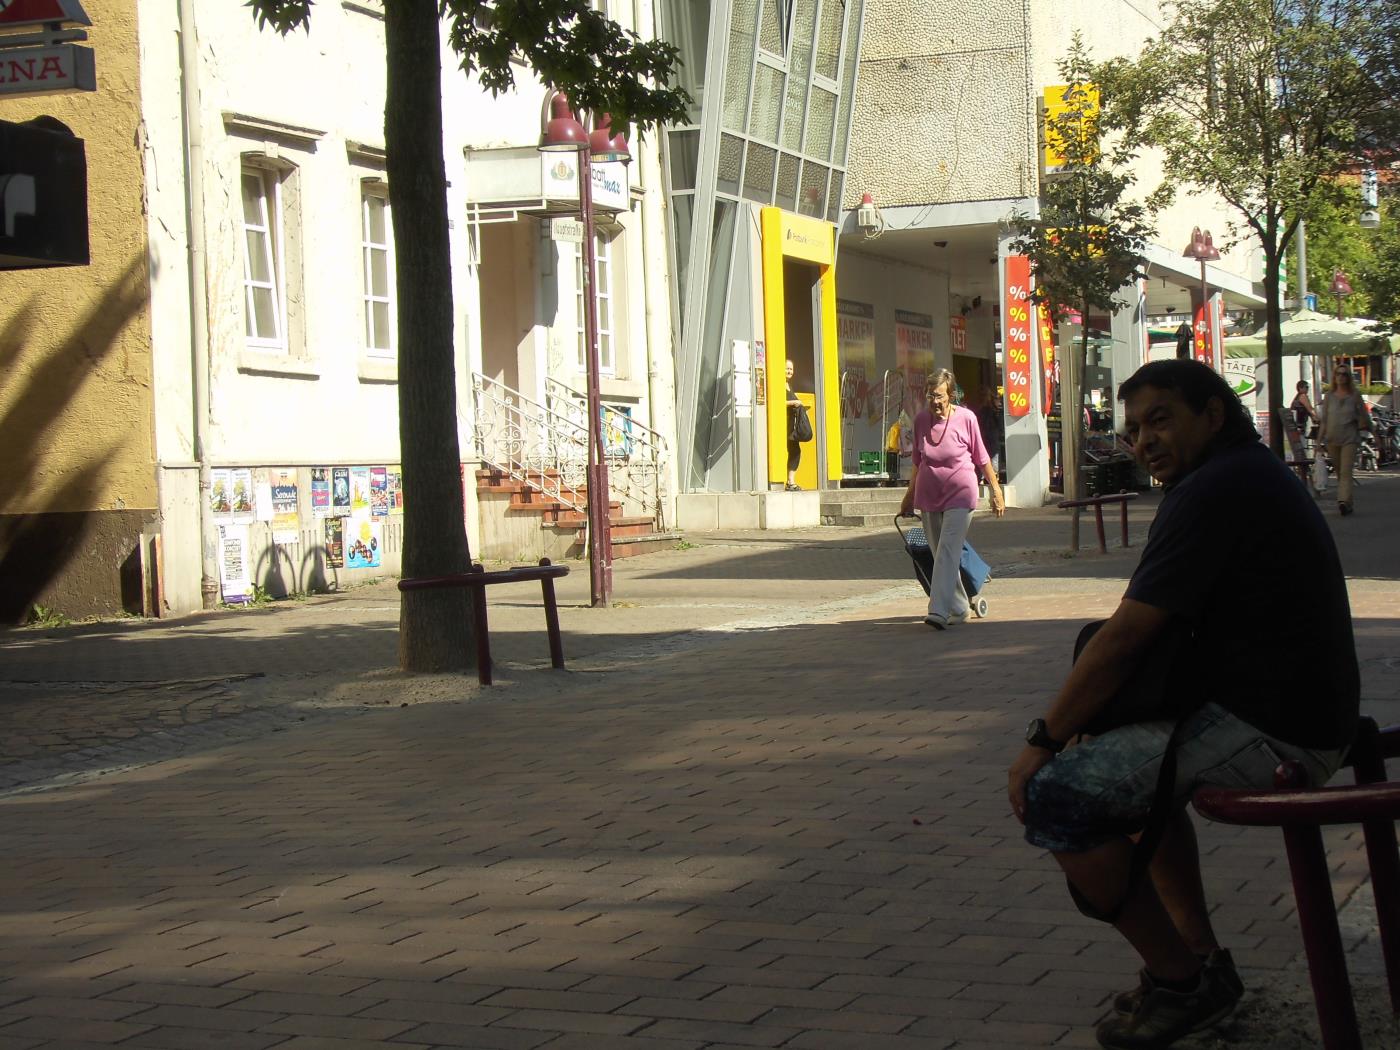 A wonderful day in Wiesloch without Jehovah's Witnesses propaganda